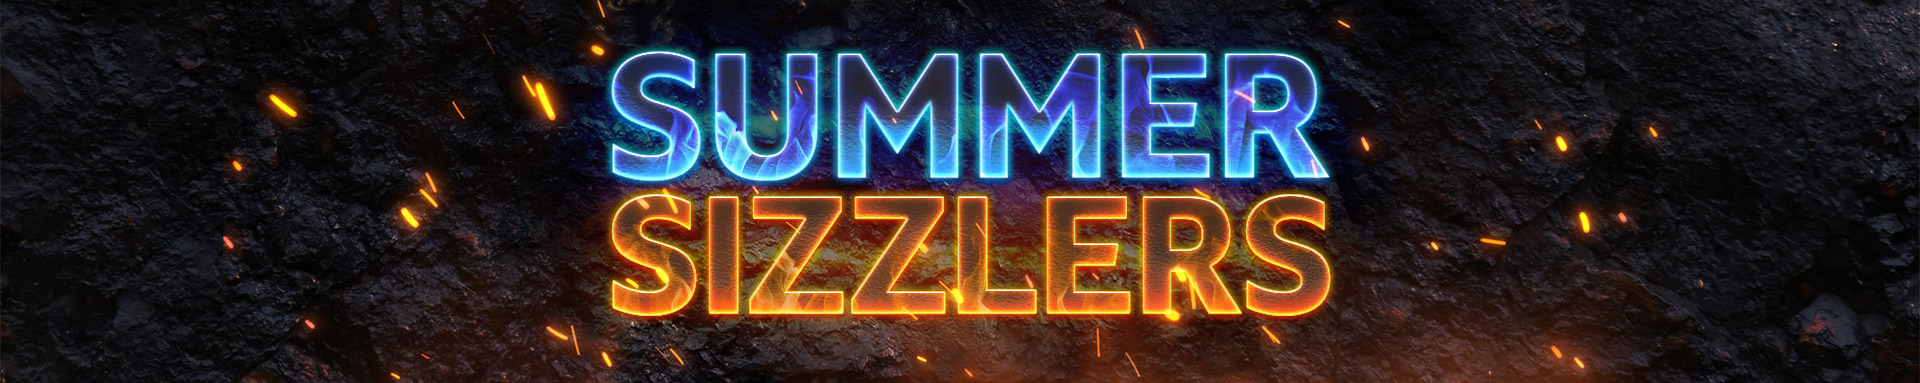 SUMMER SIZZLERS